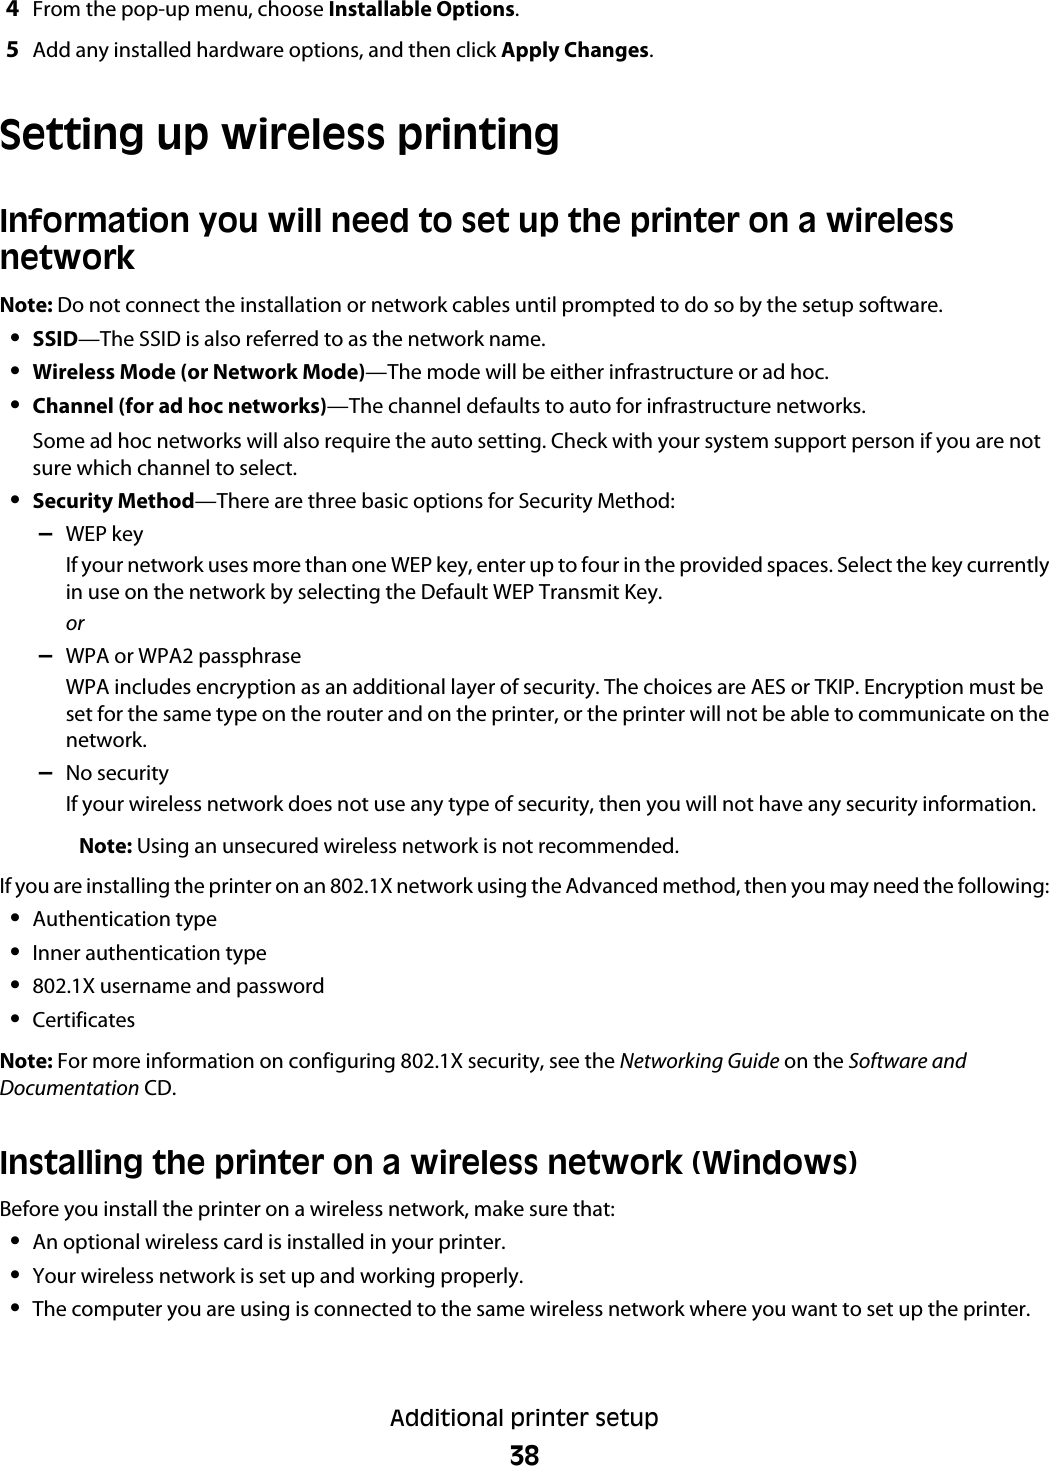 how to install dell 725 printer without disc